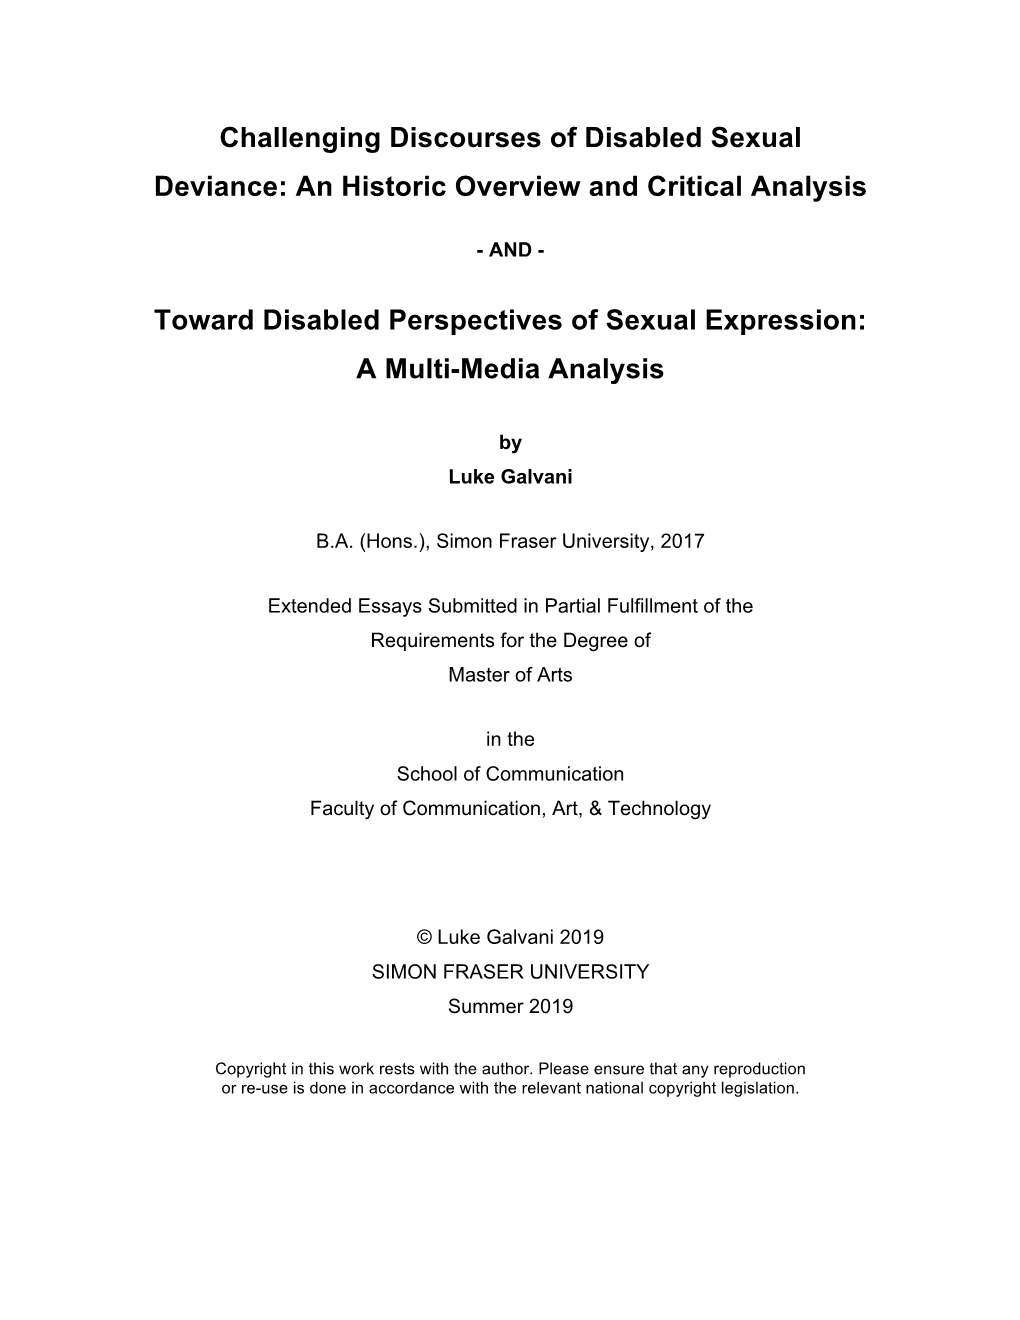 Challenging Discourses of Disabled Sexual Deviance: an Historic Overview and Critical Analysis